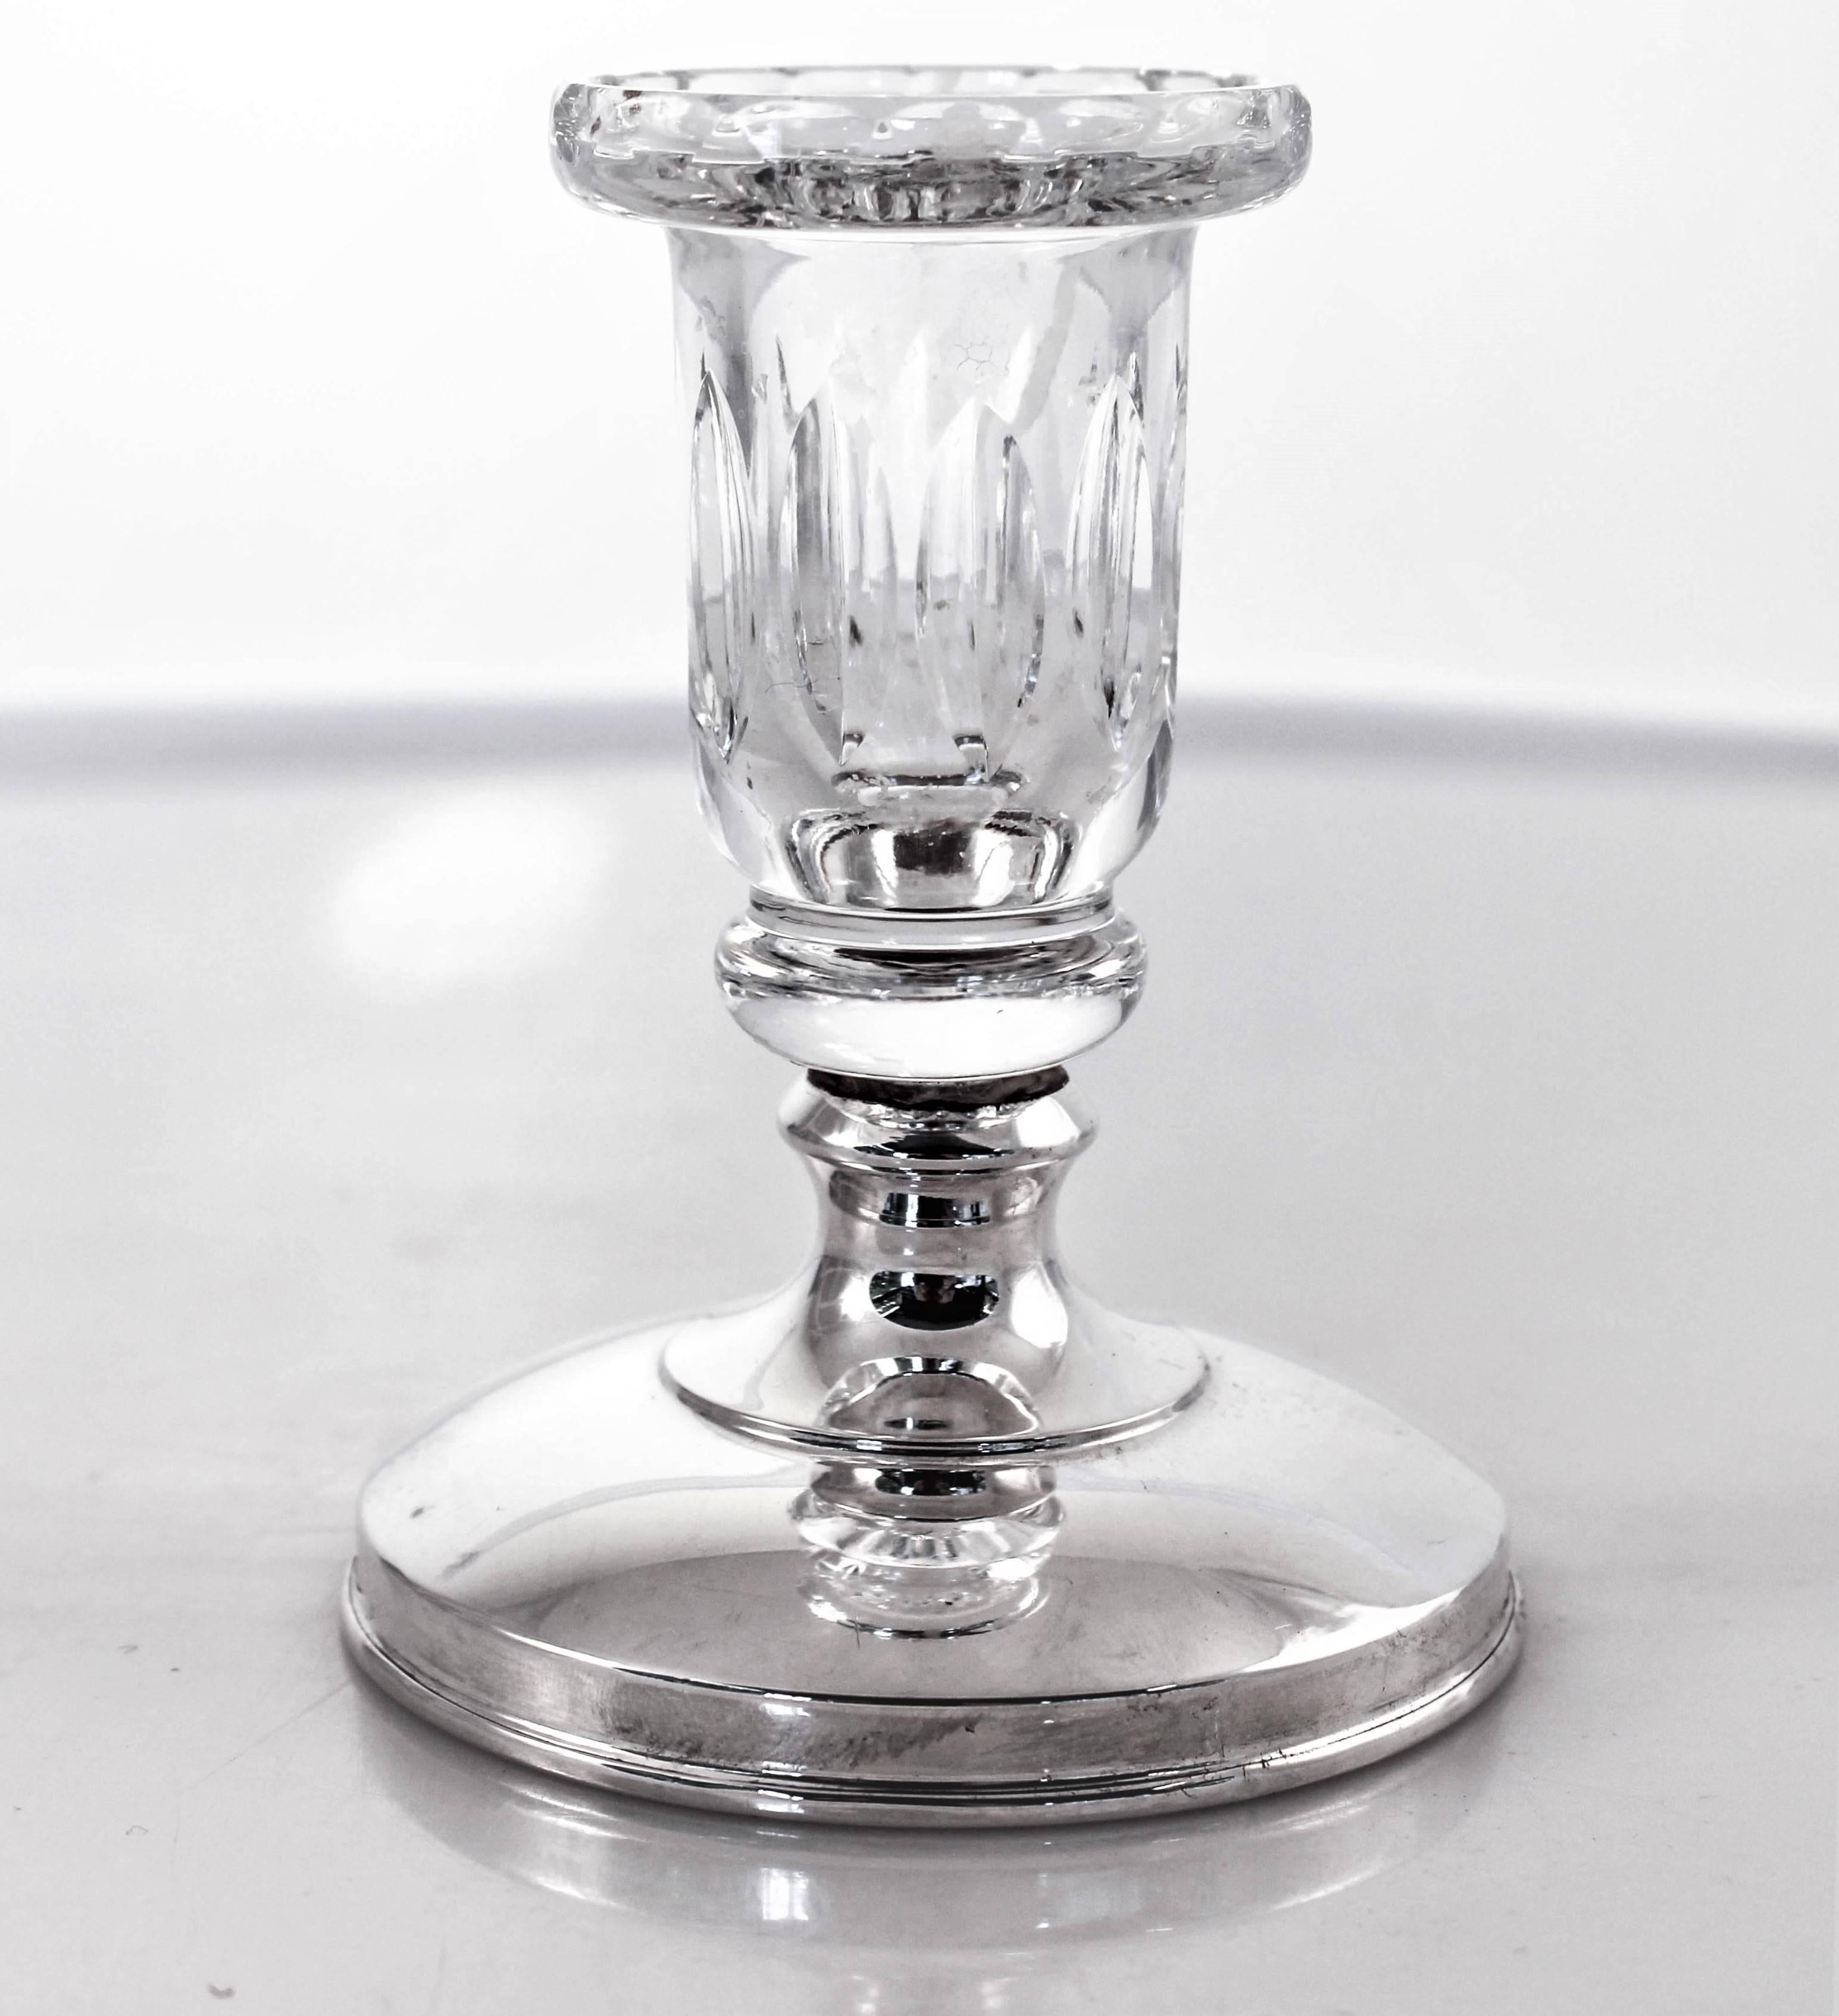 A charming pair of Hawkes crystal and sterling candlesticks. They have oval shaped ridges around the candle holder, a fluted neck and at the top it flares out. The sterling base has a clean simple look. A casual way to dress up your candlelight